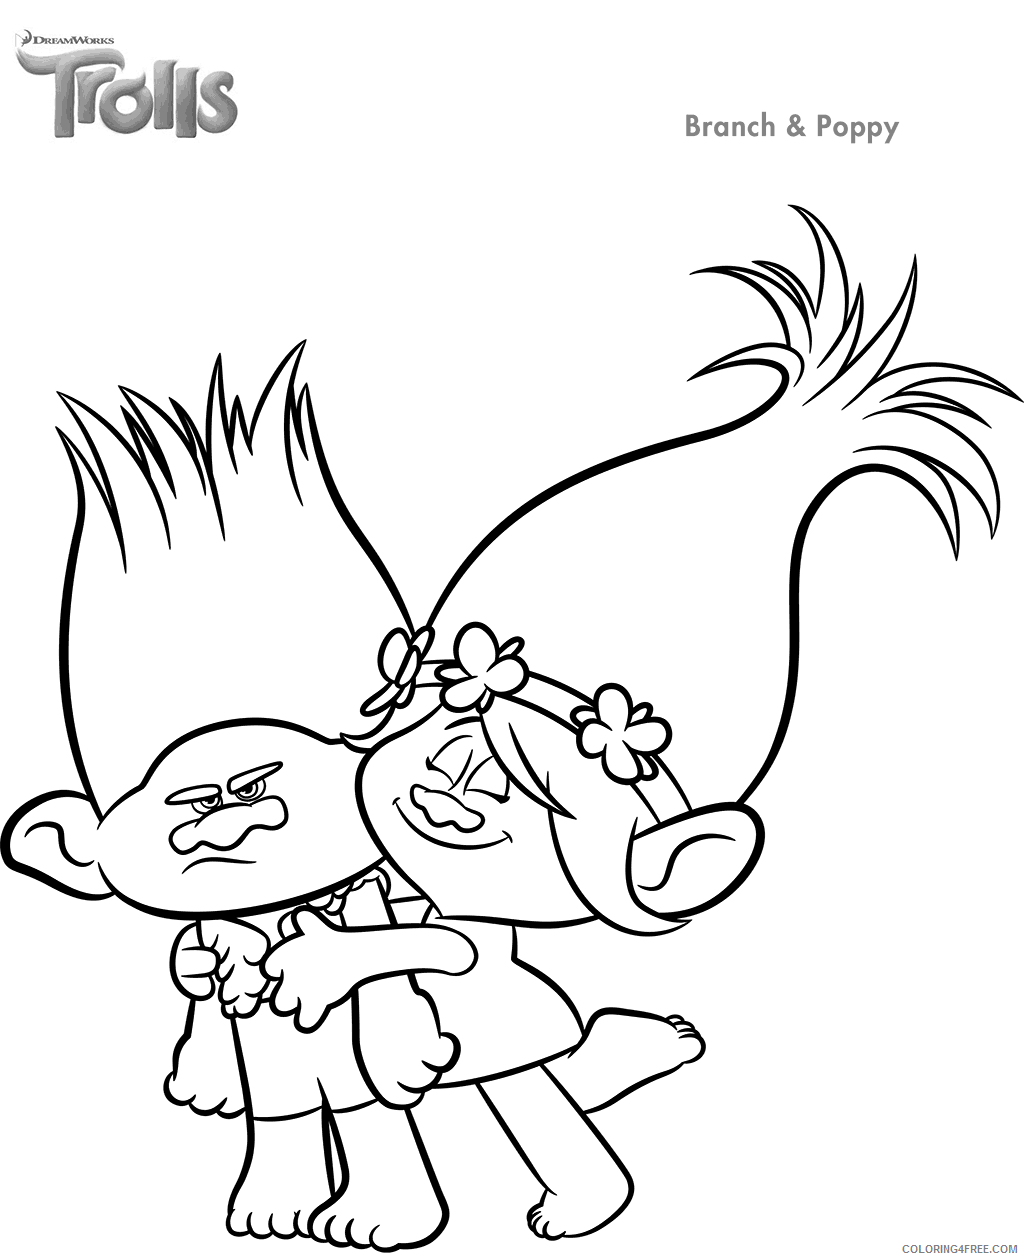 Trolls Coloring Pages TV Film Trolls Movie Printable 2020 10856 Coloring4free